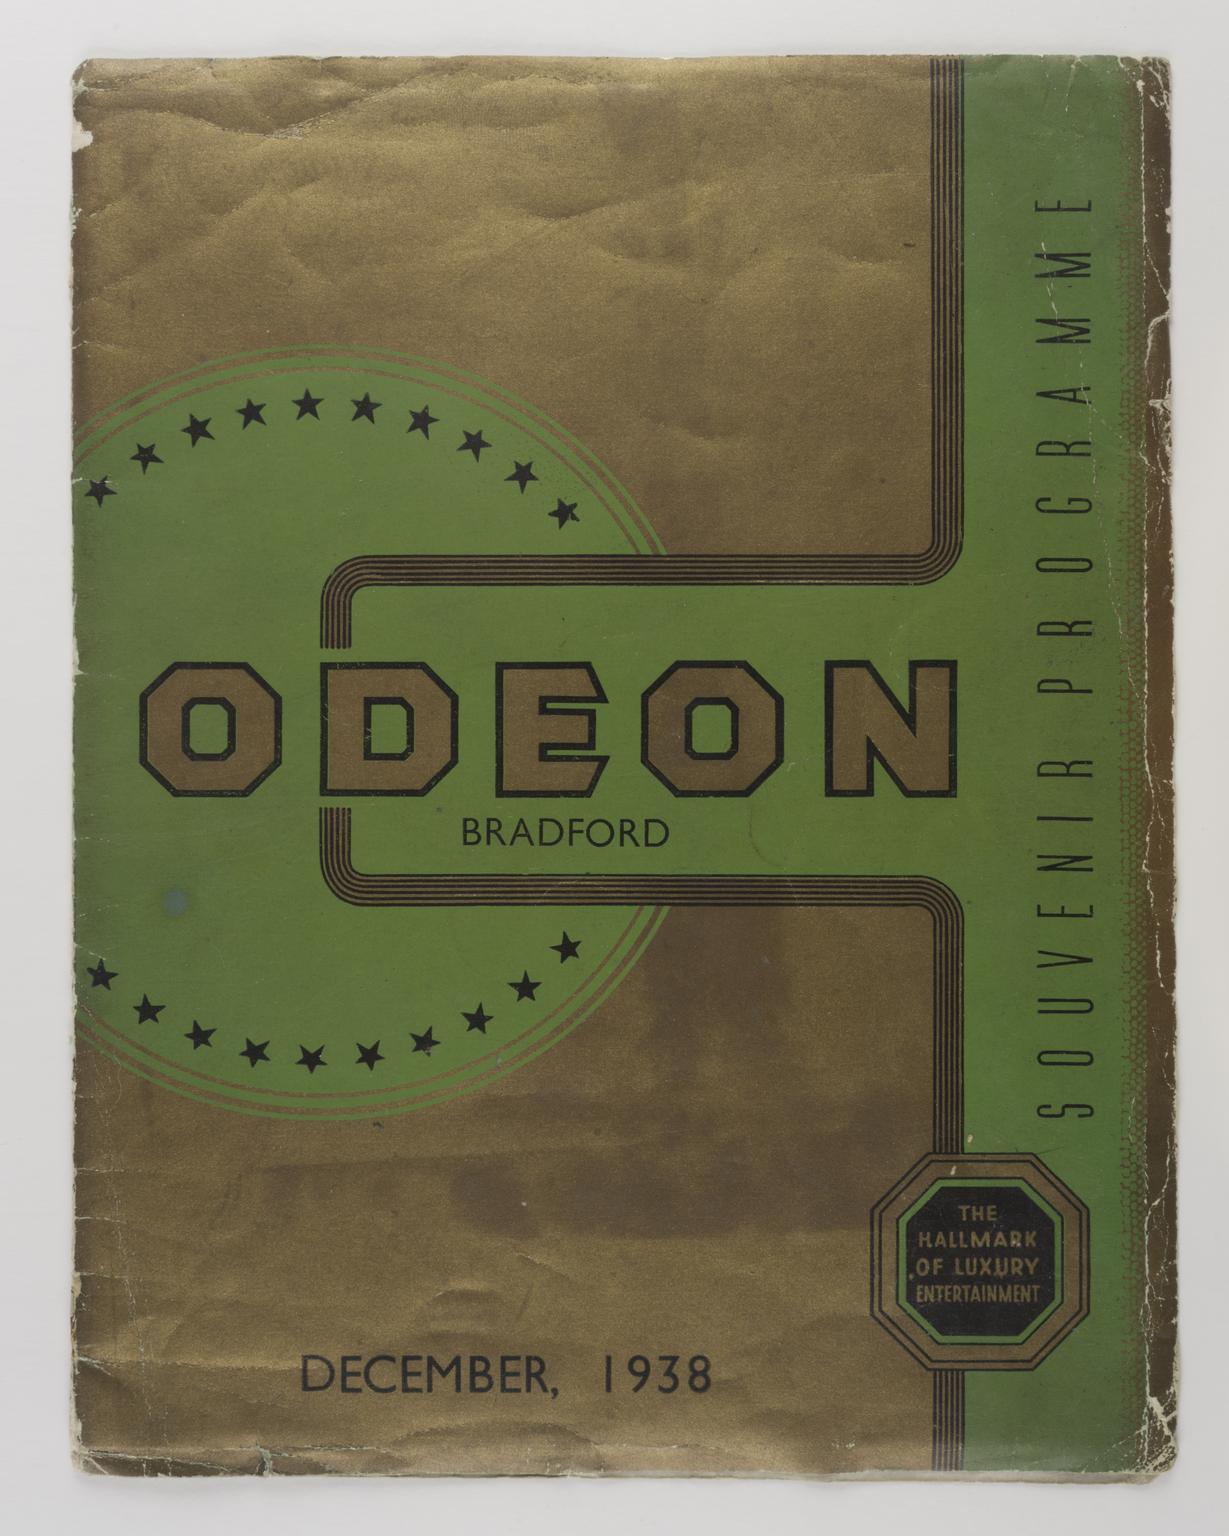 Gold and green booklet in art deco style reading 'odeon Bradford souvenir programme, December 1938'